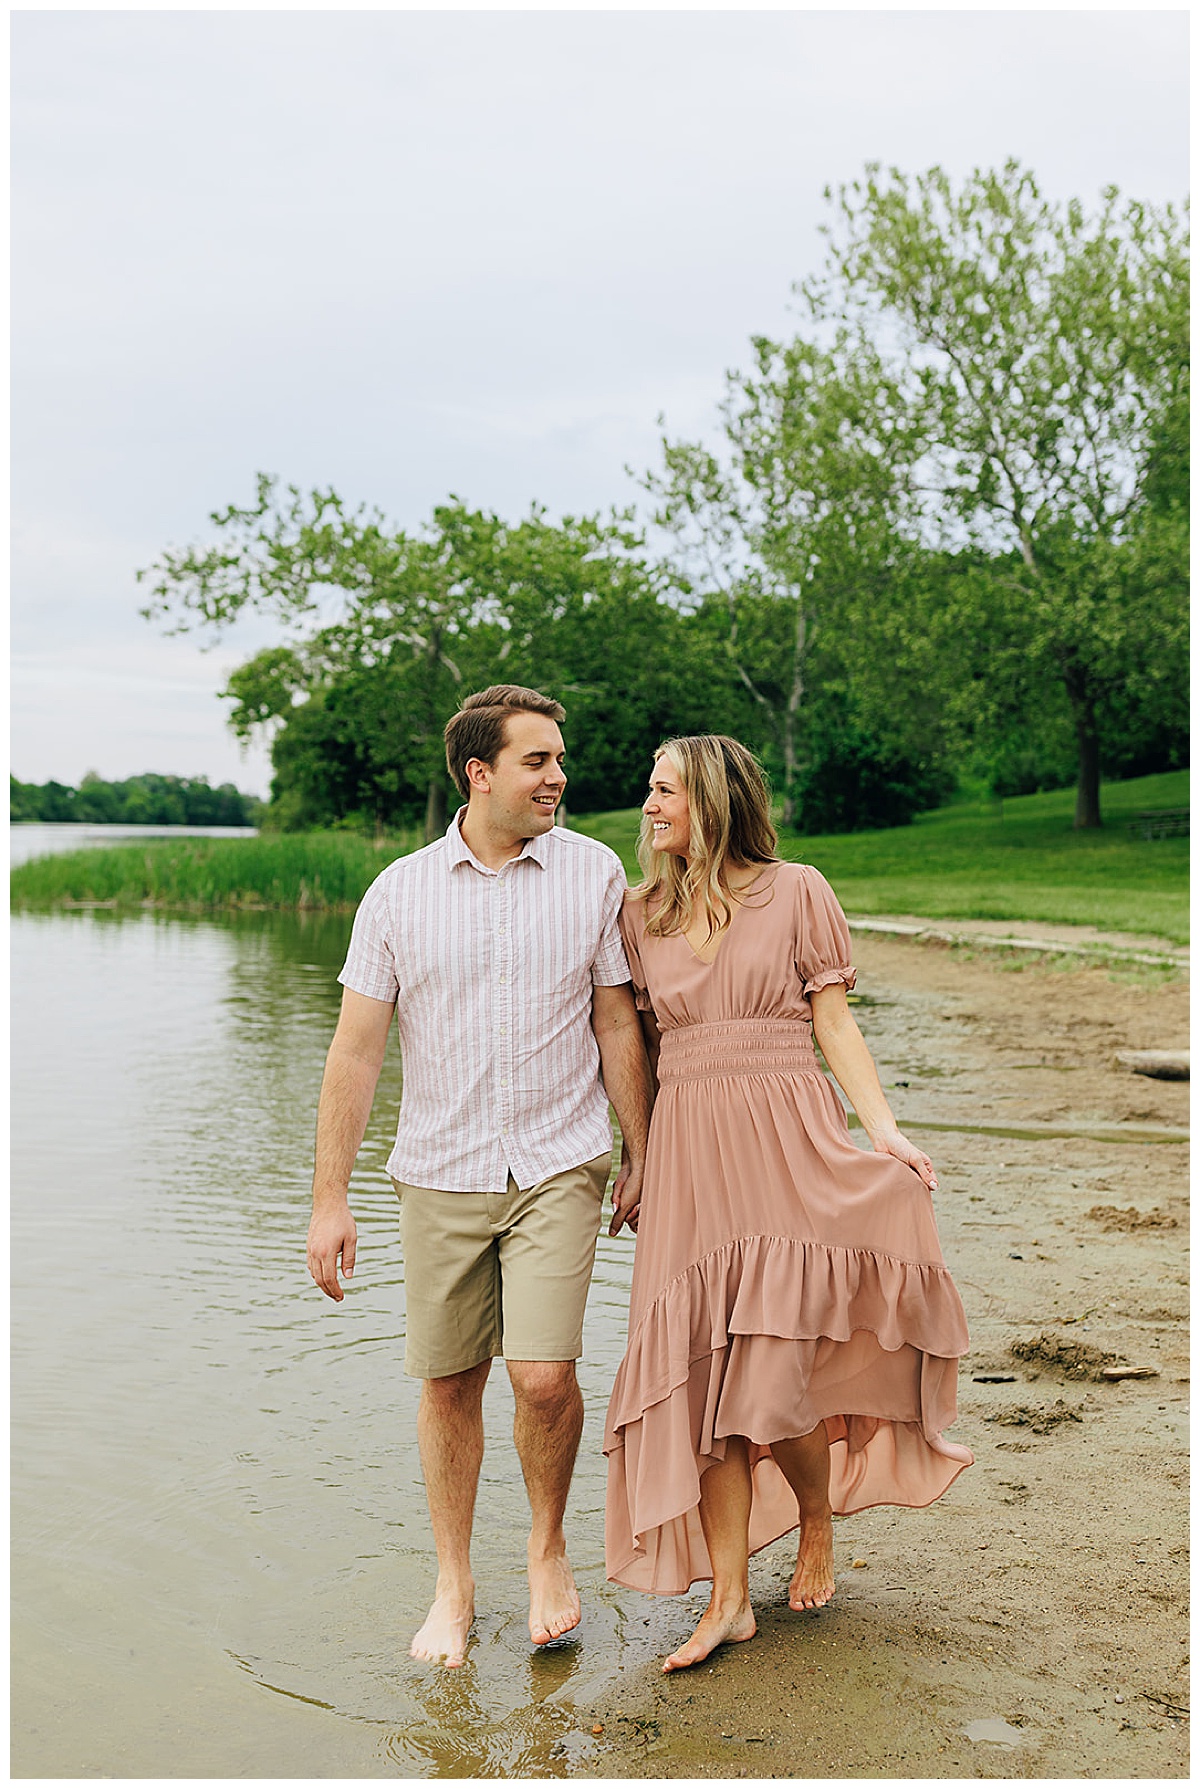 Couple walk together by lake for Detroit wedding photographer